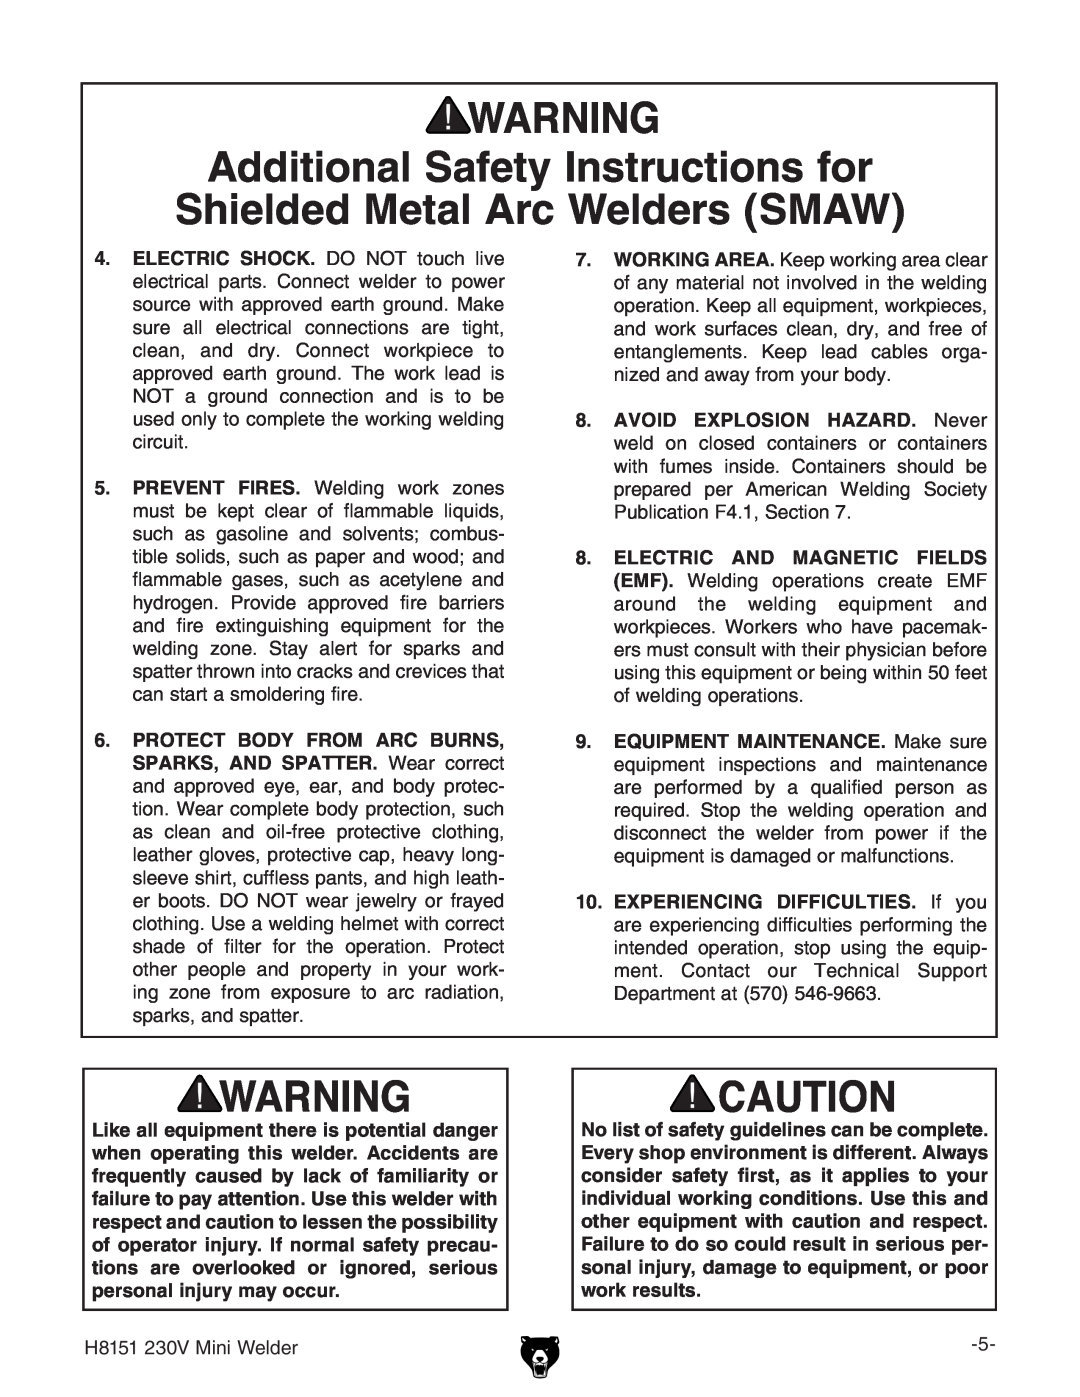 Grizzly 230V, H8151 owner manual Additional Safety Instructions for Shielded Metal Arc Welders SMAW 